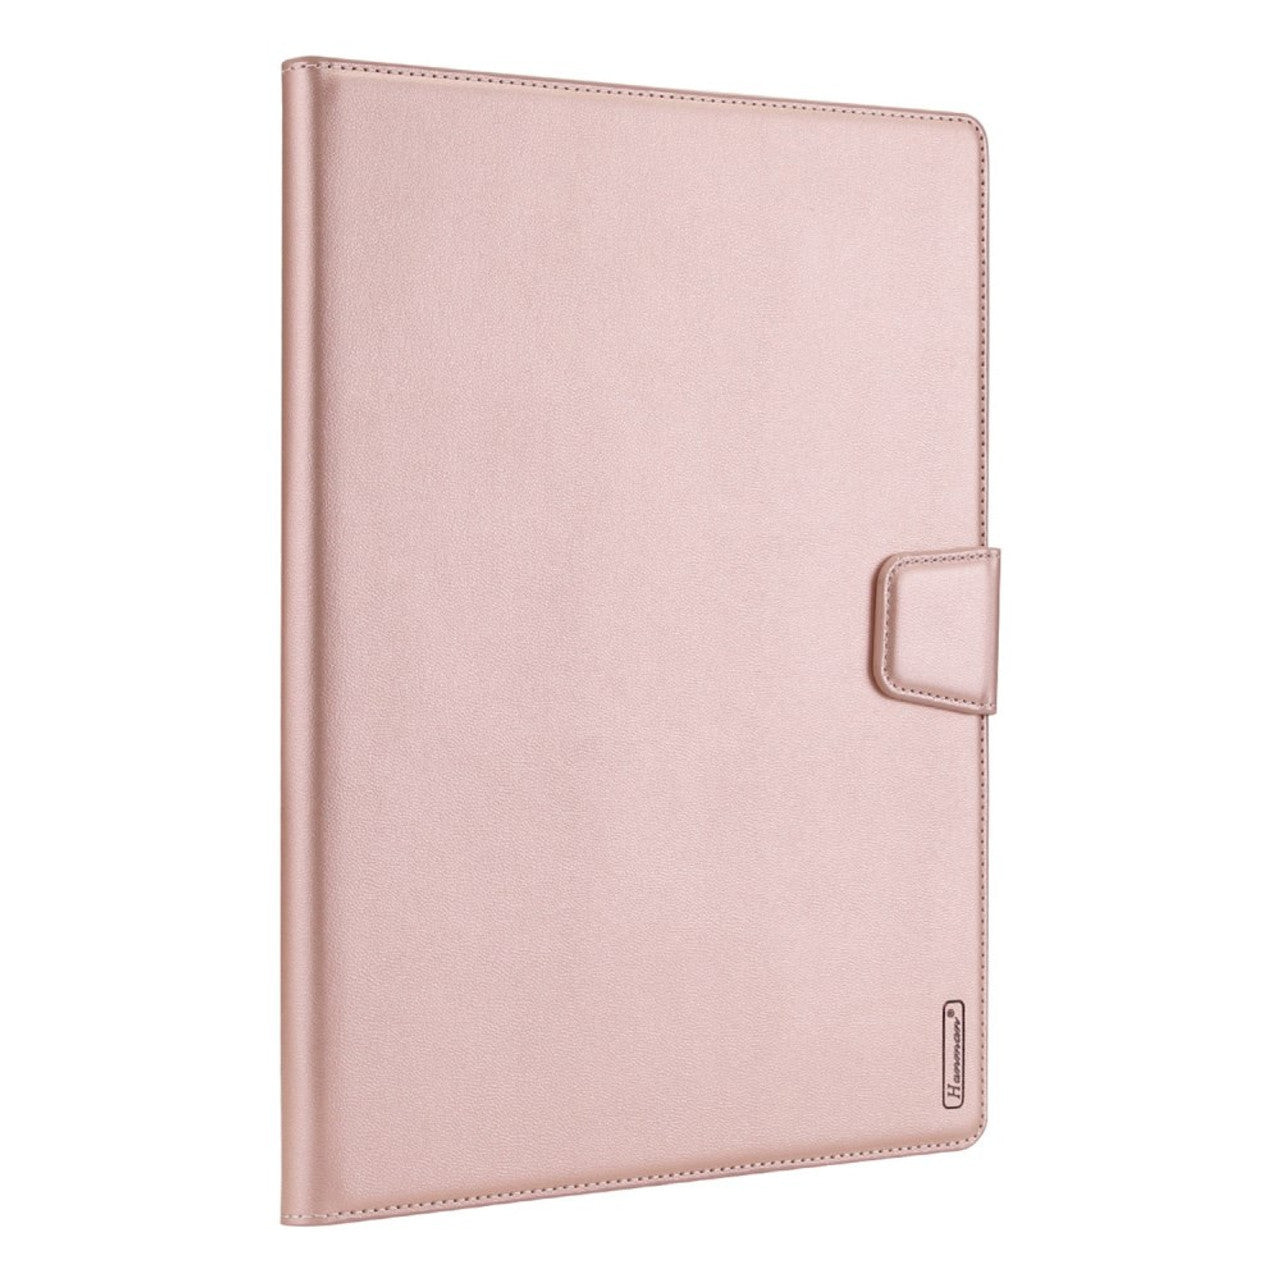 Hanman Mill Series For iPad 7,8,9 (10.2 inch), iPad Air 3rd Gen (10.5 inch 2019) & Pro 10.5-inch (2017) ROSE GOLD *Free Shipping*